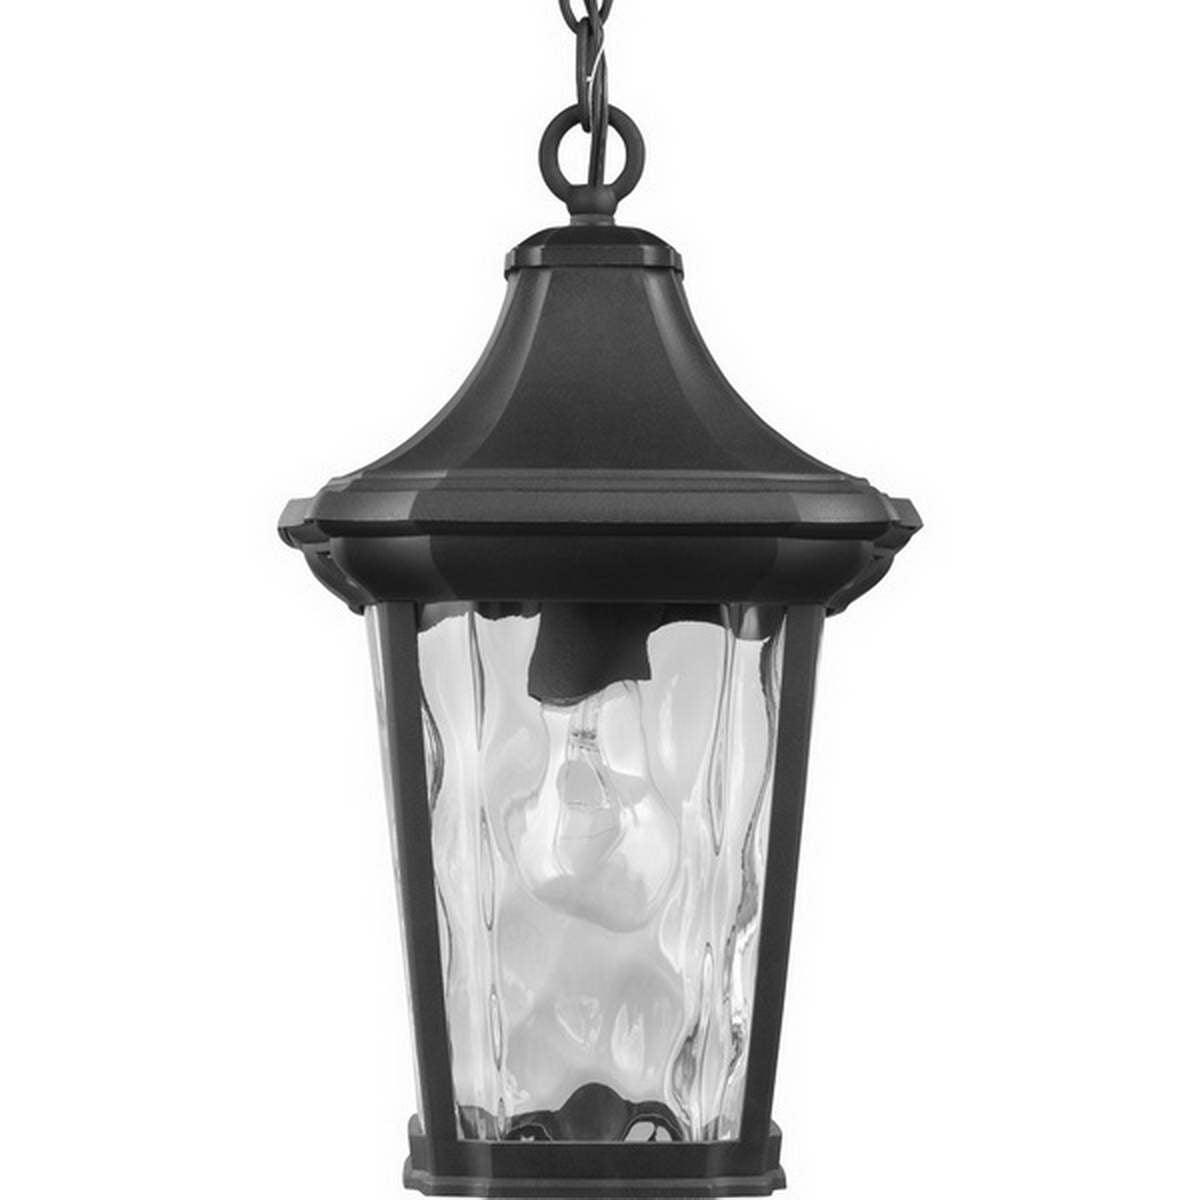 Marquette 15 in. Outdoor Hanging Lantern Black Finish